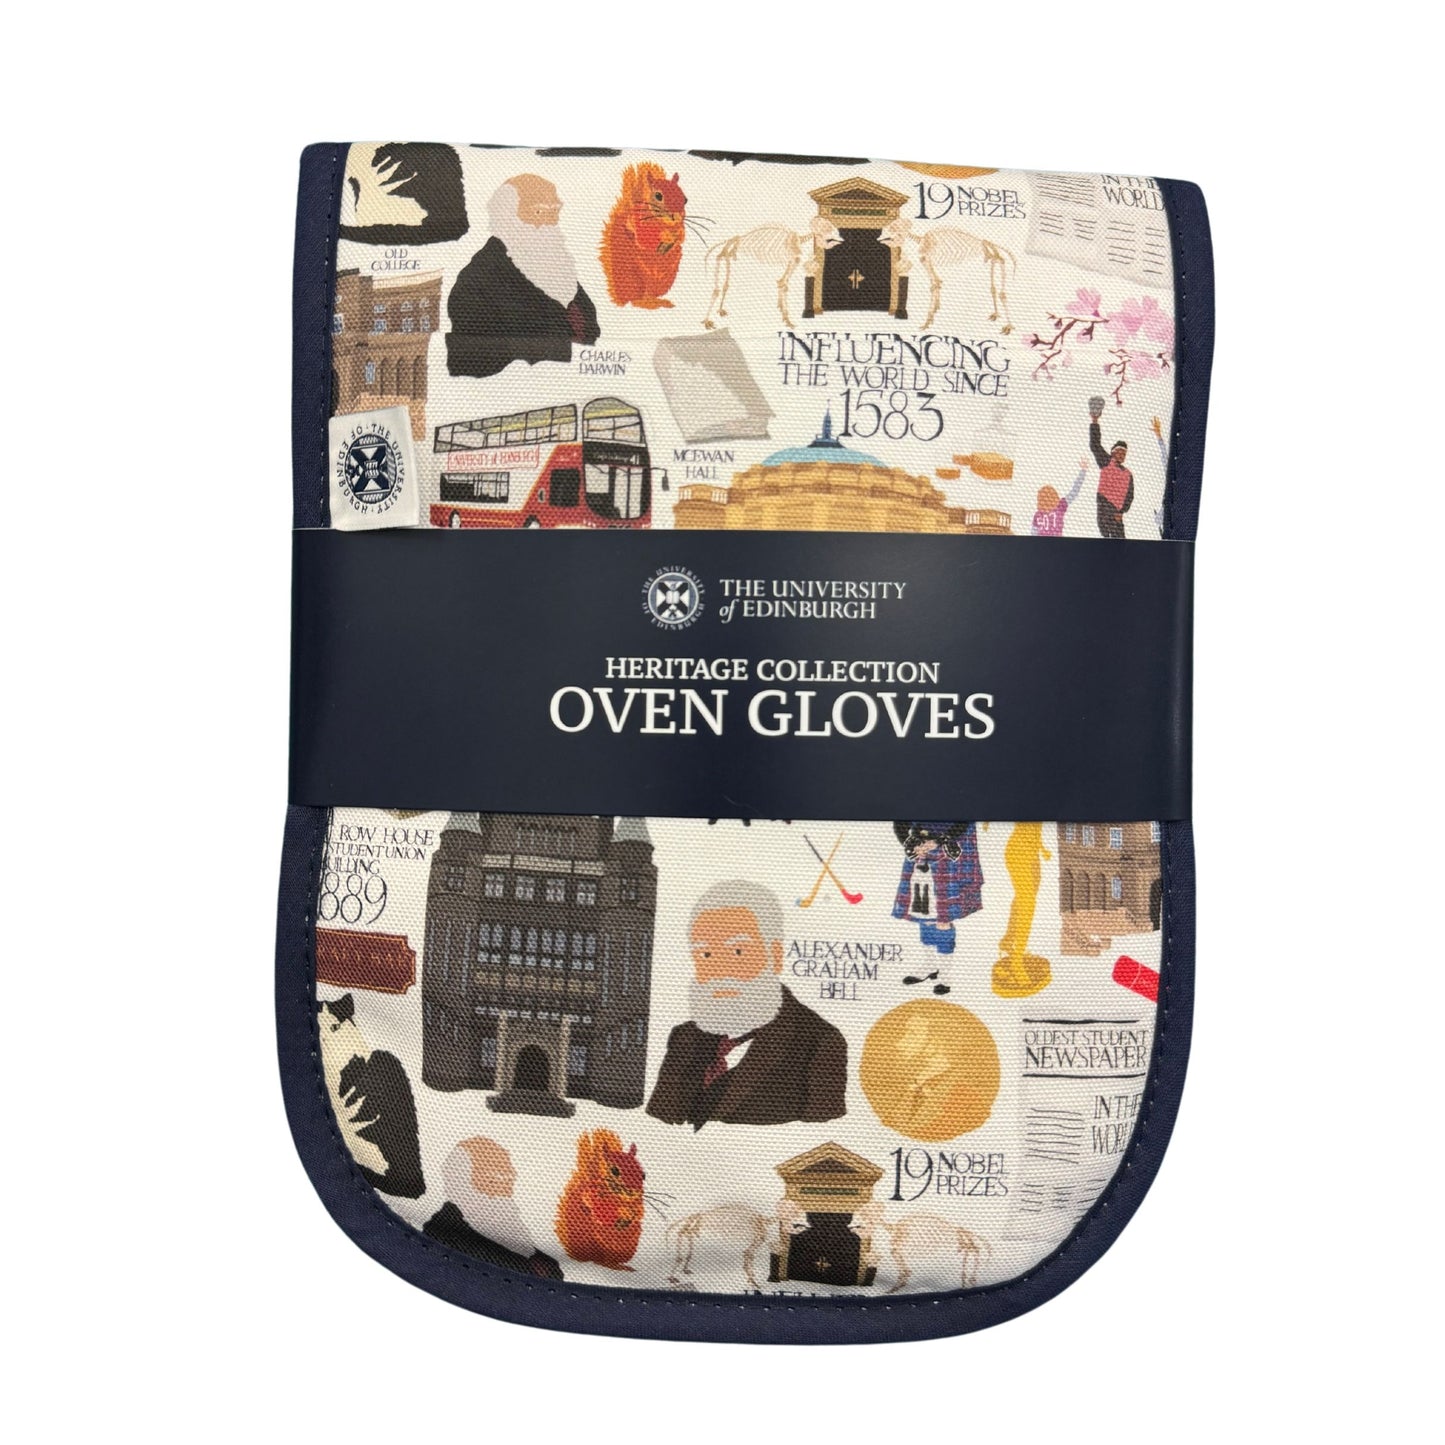 Oven gloves featuring Heritage Collection illustration designed by Esther